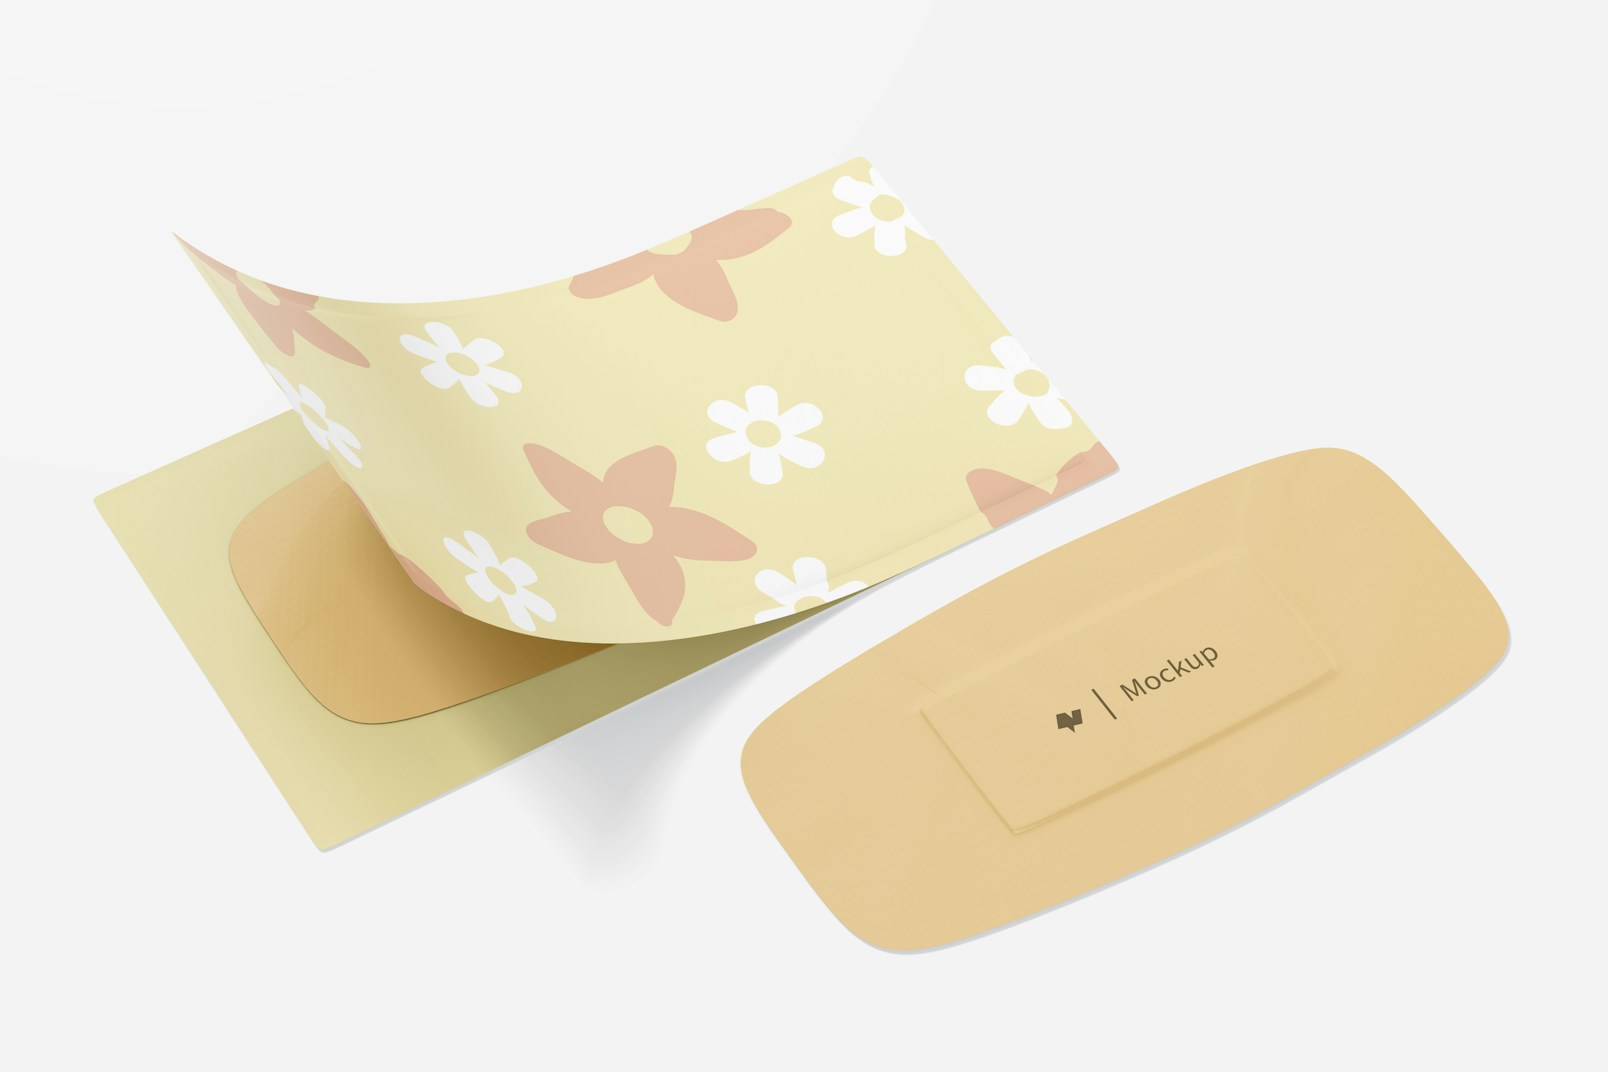 Oval Band Aids Mockup, Perspective